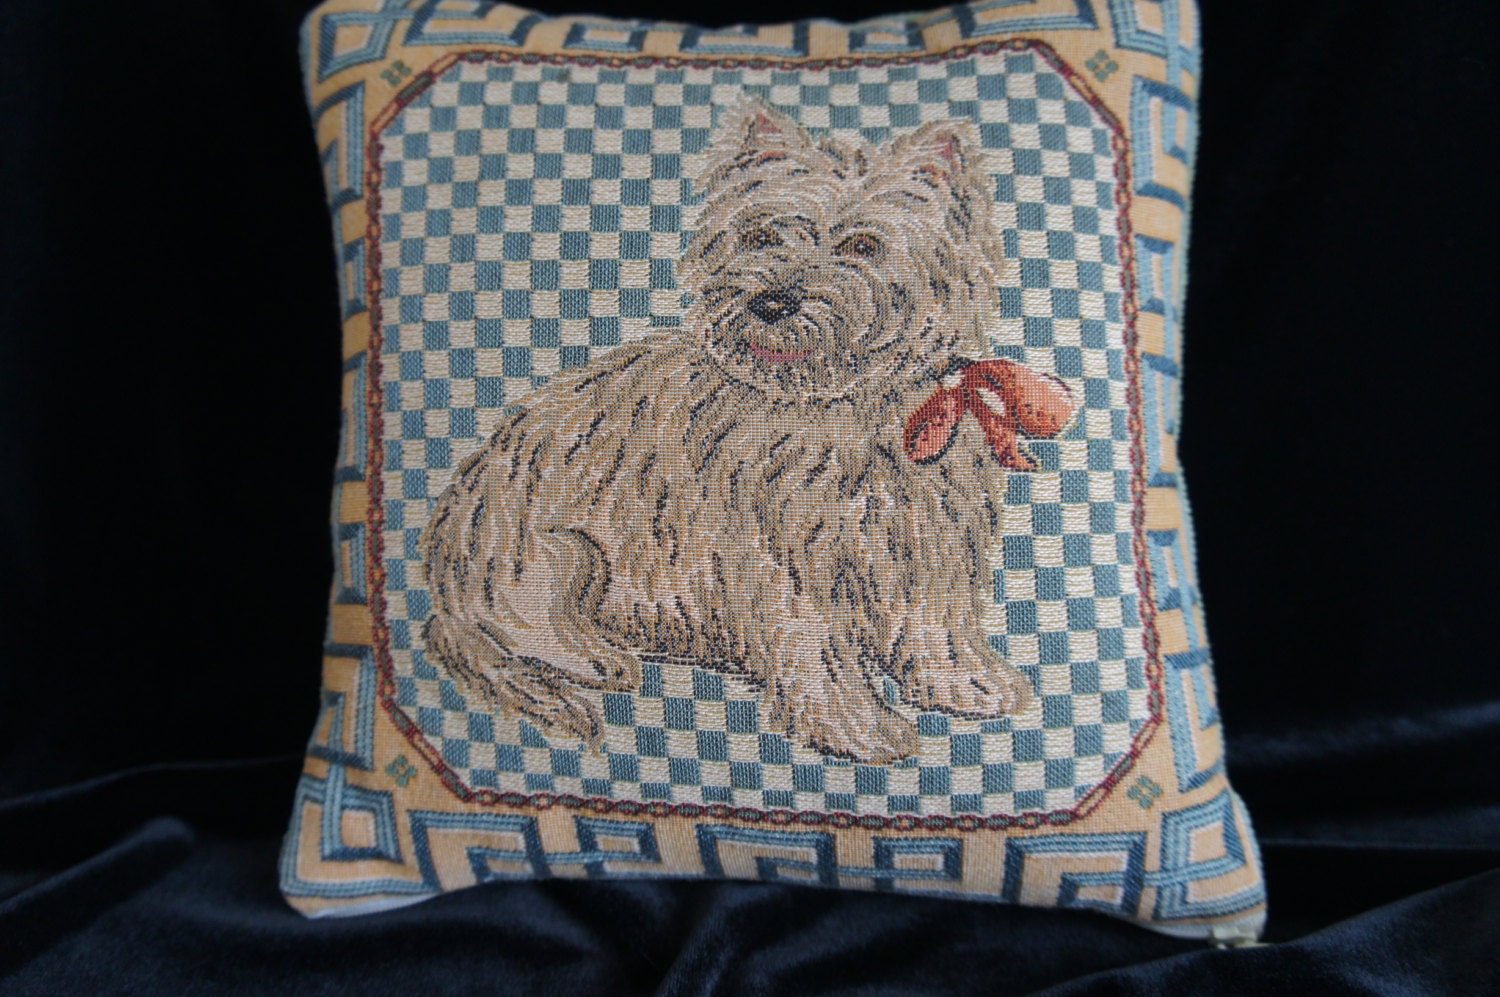 Vintage Tapestry Dog Pillow Throw Pillow Decorative by Horseluxe